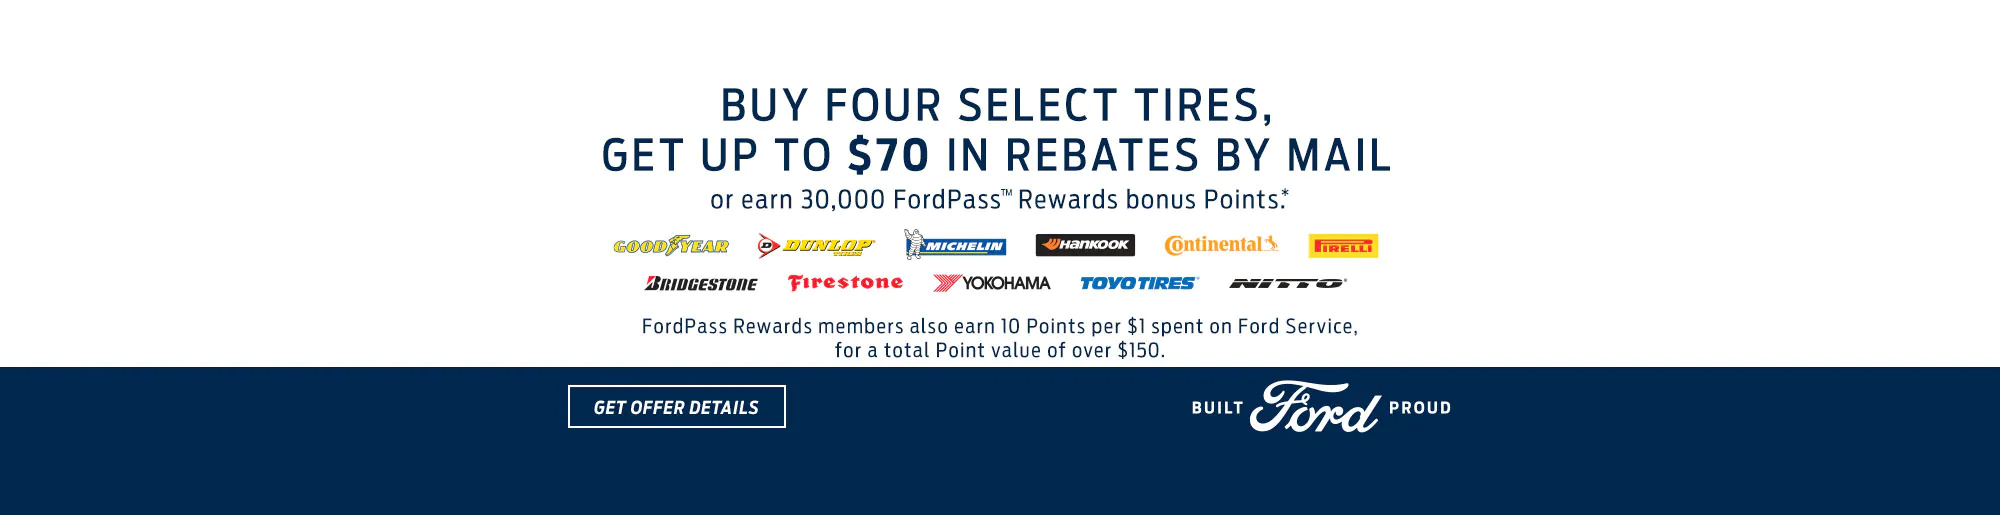 Buy 4 tires get up to $70